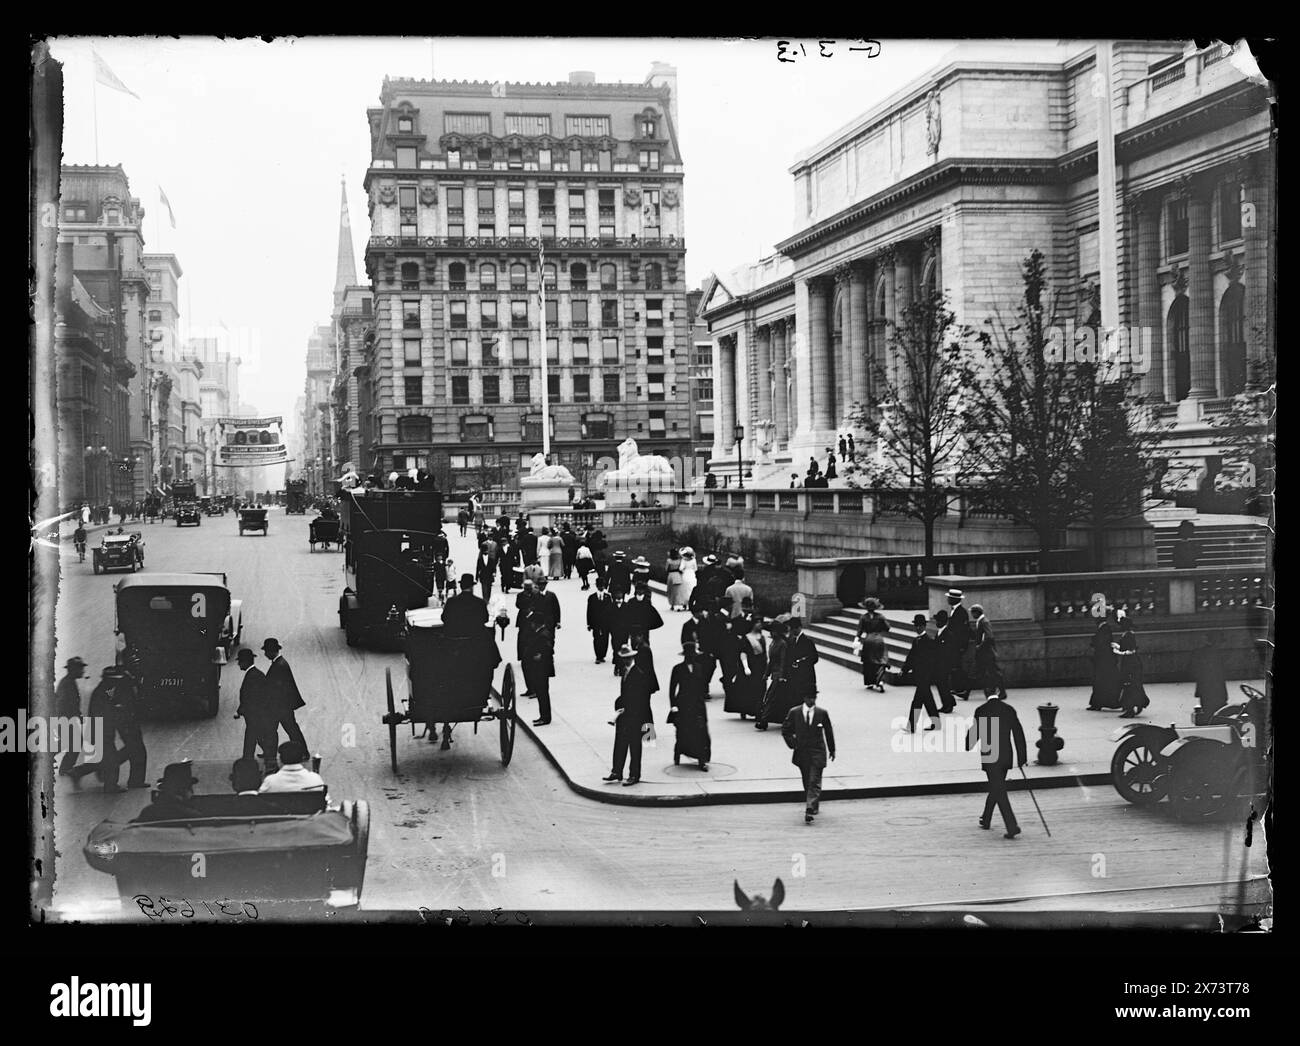 Fifth Avenue and New York Public Library at Forty-second Street, New York, N.Y., Title devised by cataloger., 'G 313' on negative., 'Republican State Committee, William Howard Taft' on banner across street., Detroit Publishing Co. no. 031629., Gift; State Historical Society of Colorado; 1949,  Libraries. , Streets. , Commercial facilities. , United States, New York (State), New York. Stock Photo